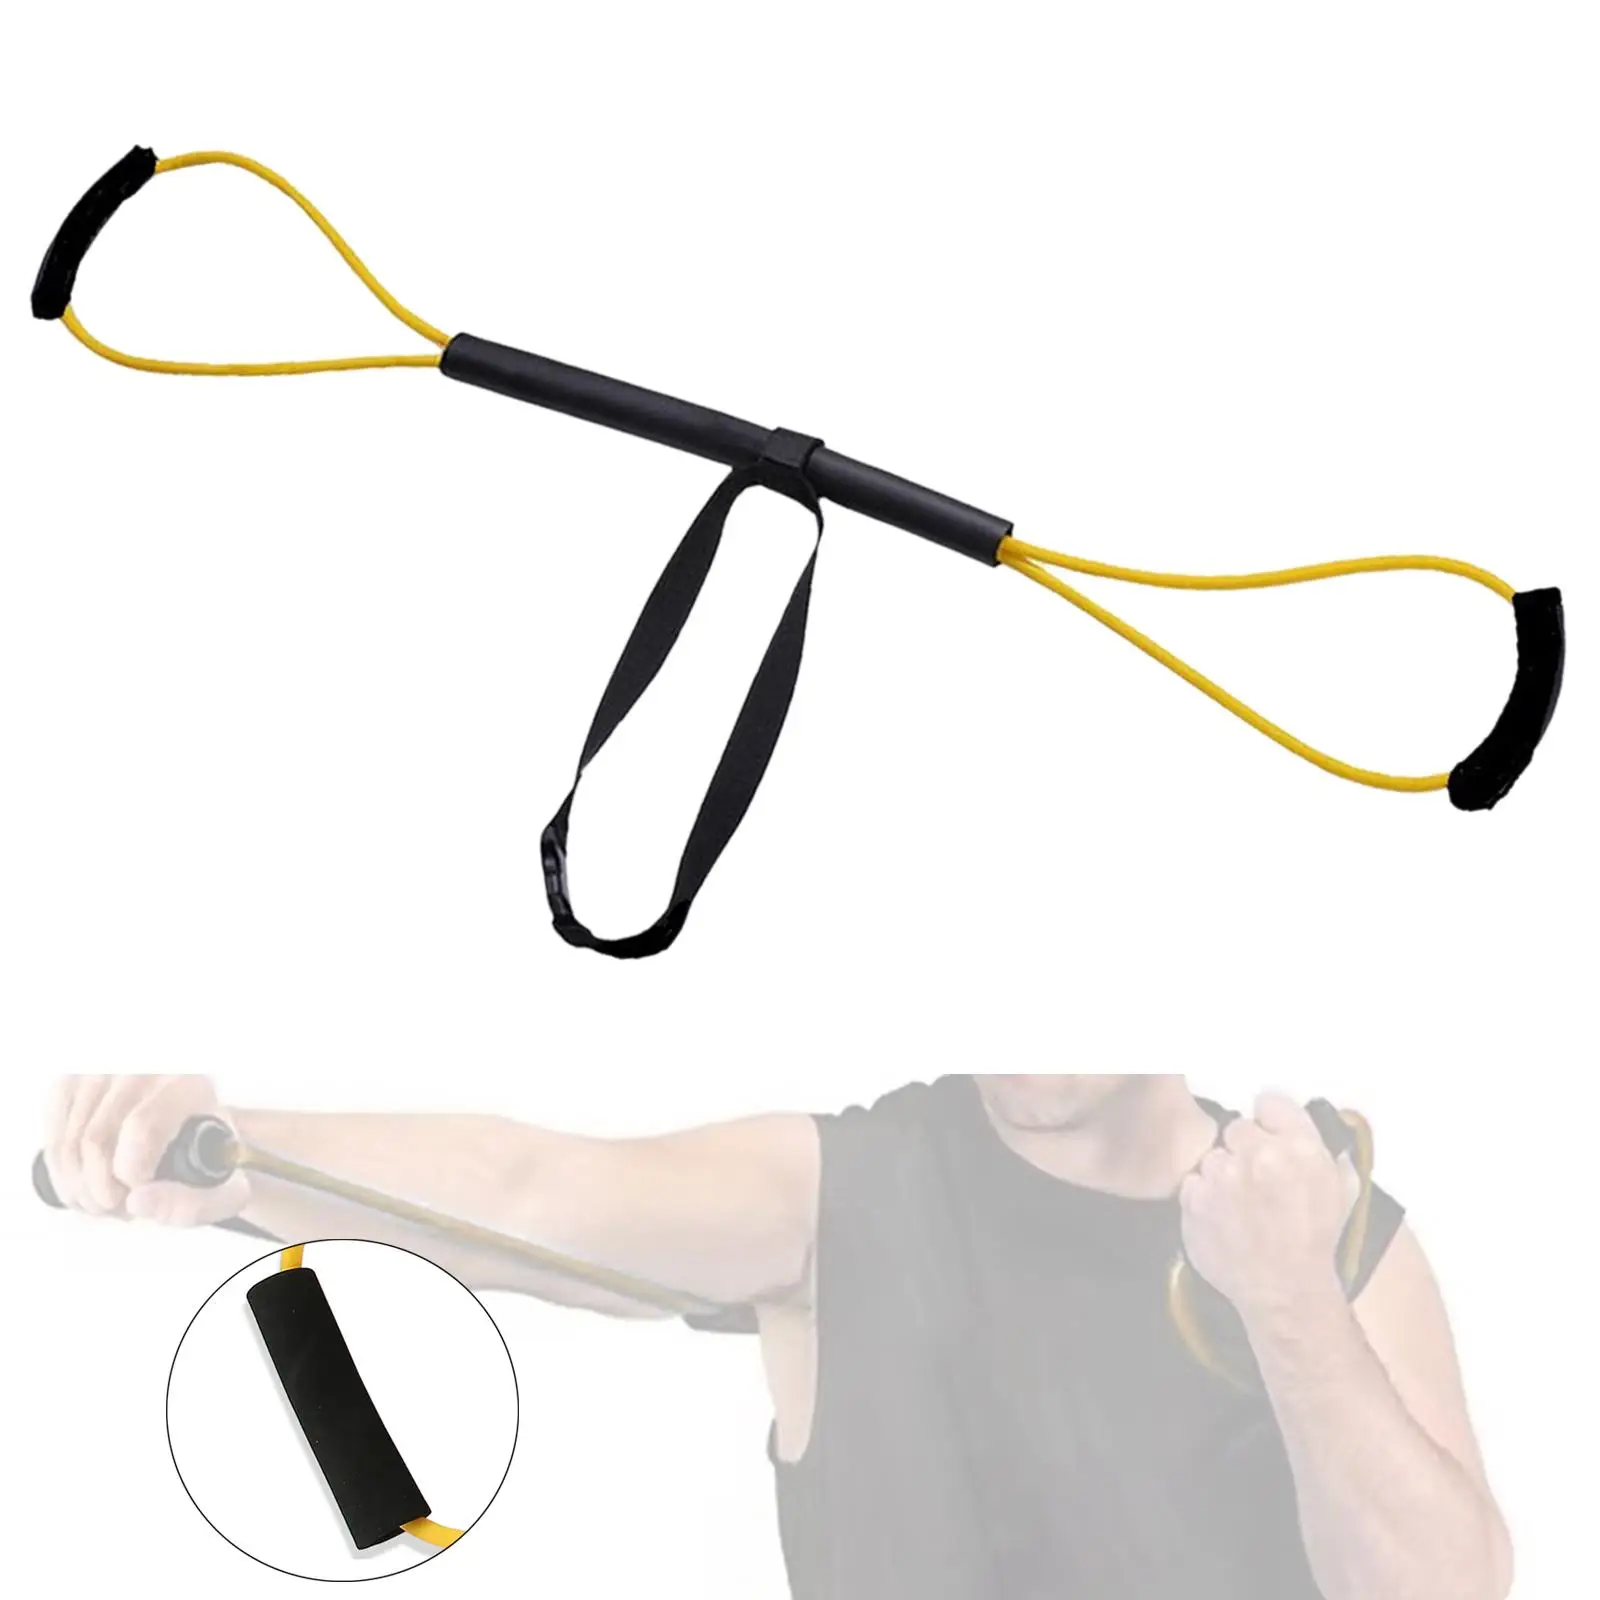 Boxing Resistance Bands Exercise Bands Exercise Bands Boxing Trainer Elastic Bands for Karate Mma Taekwondo Shadow Boxing